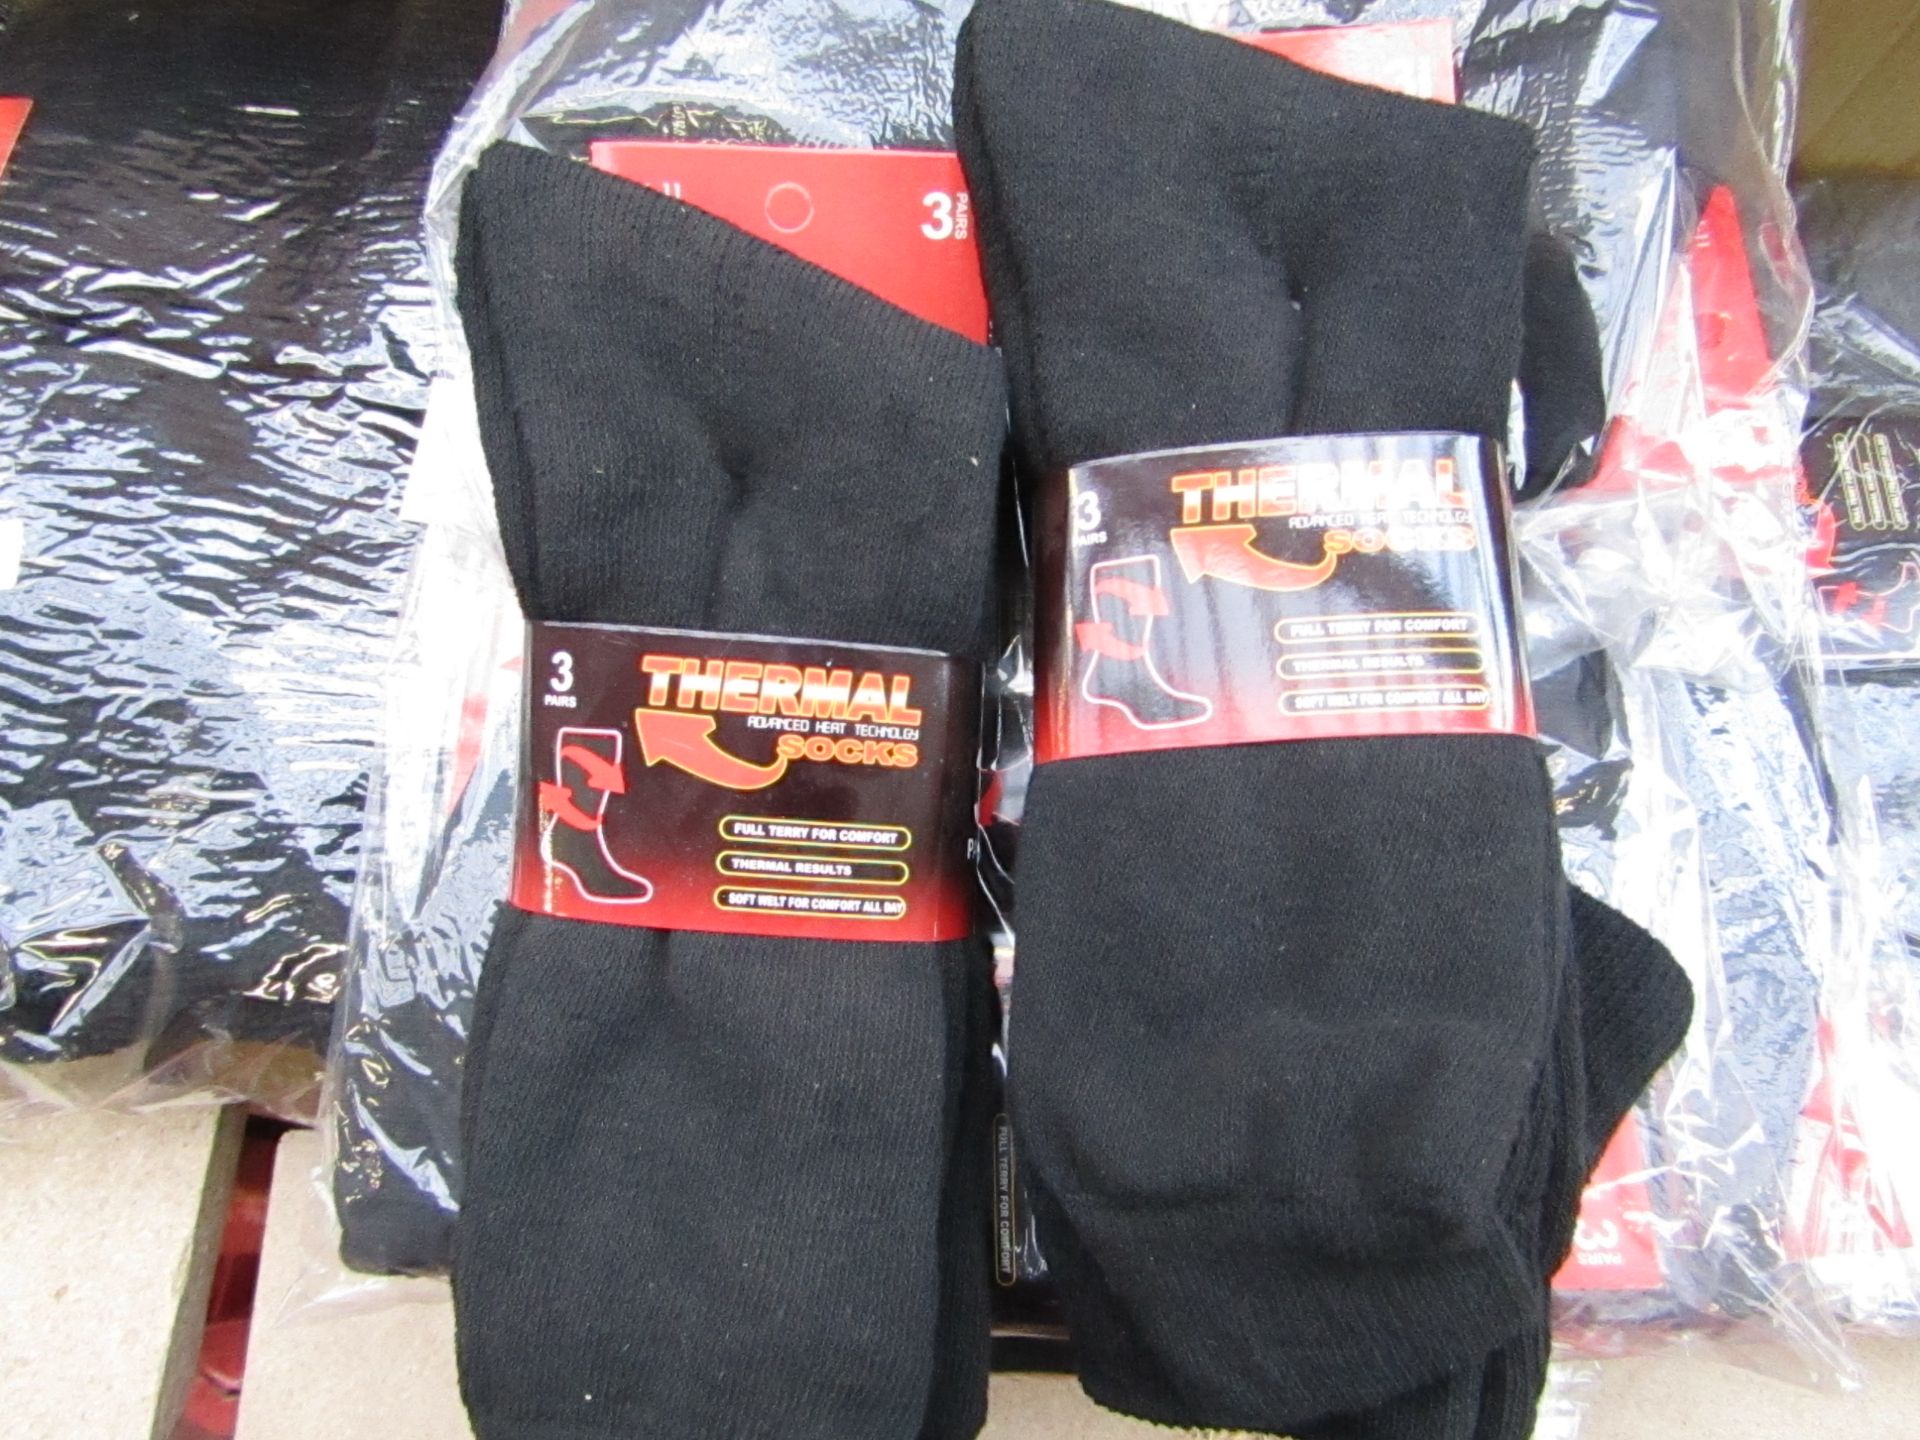 12x Pairs of thermal socks, size 6-11, new and packaged. Each RRP £9.99 totalling this lot at £119.